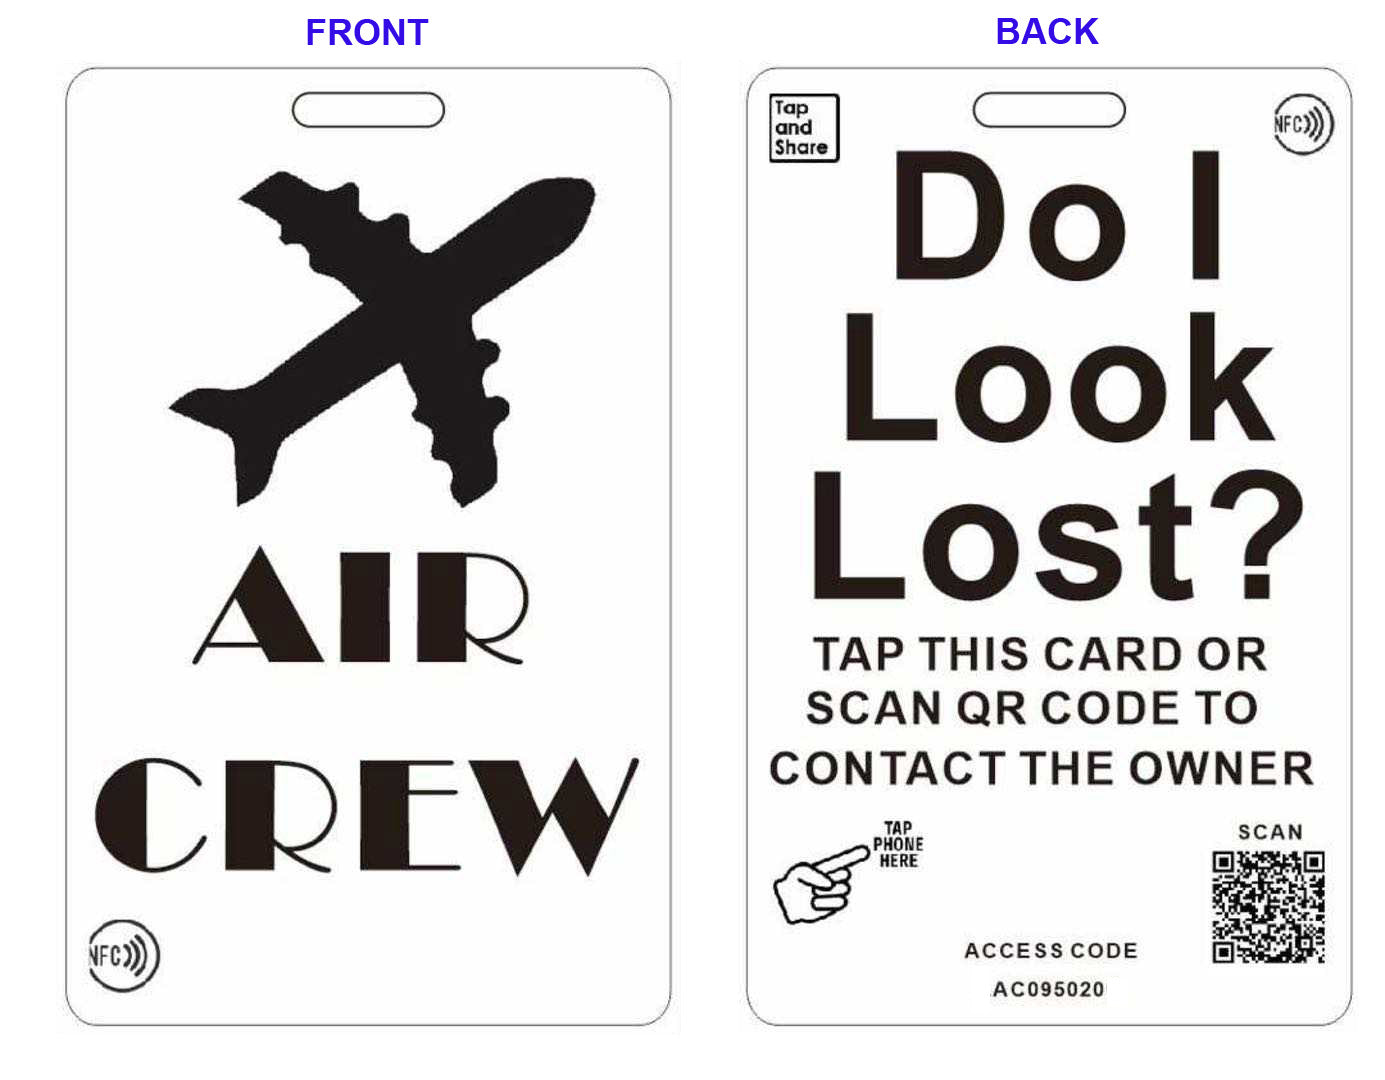 2x Smart NFC 'Air Crew' Luggage Tags with Smart Passive Tracking